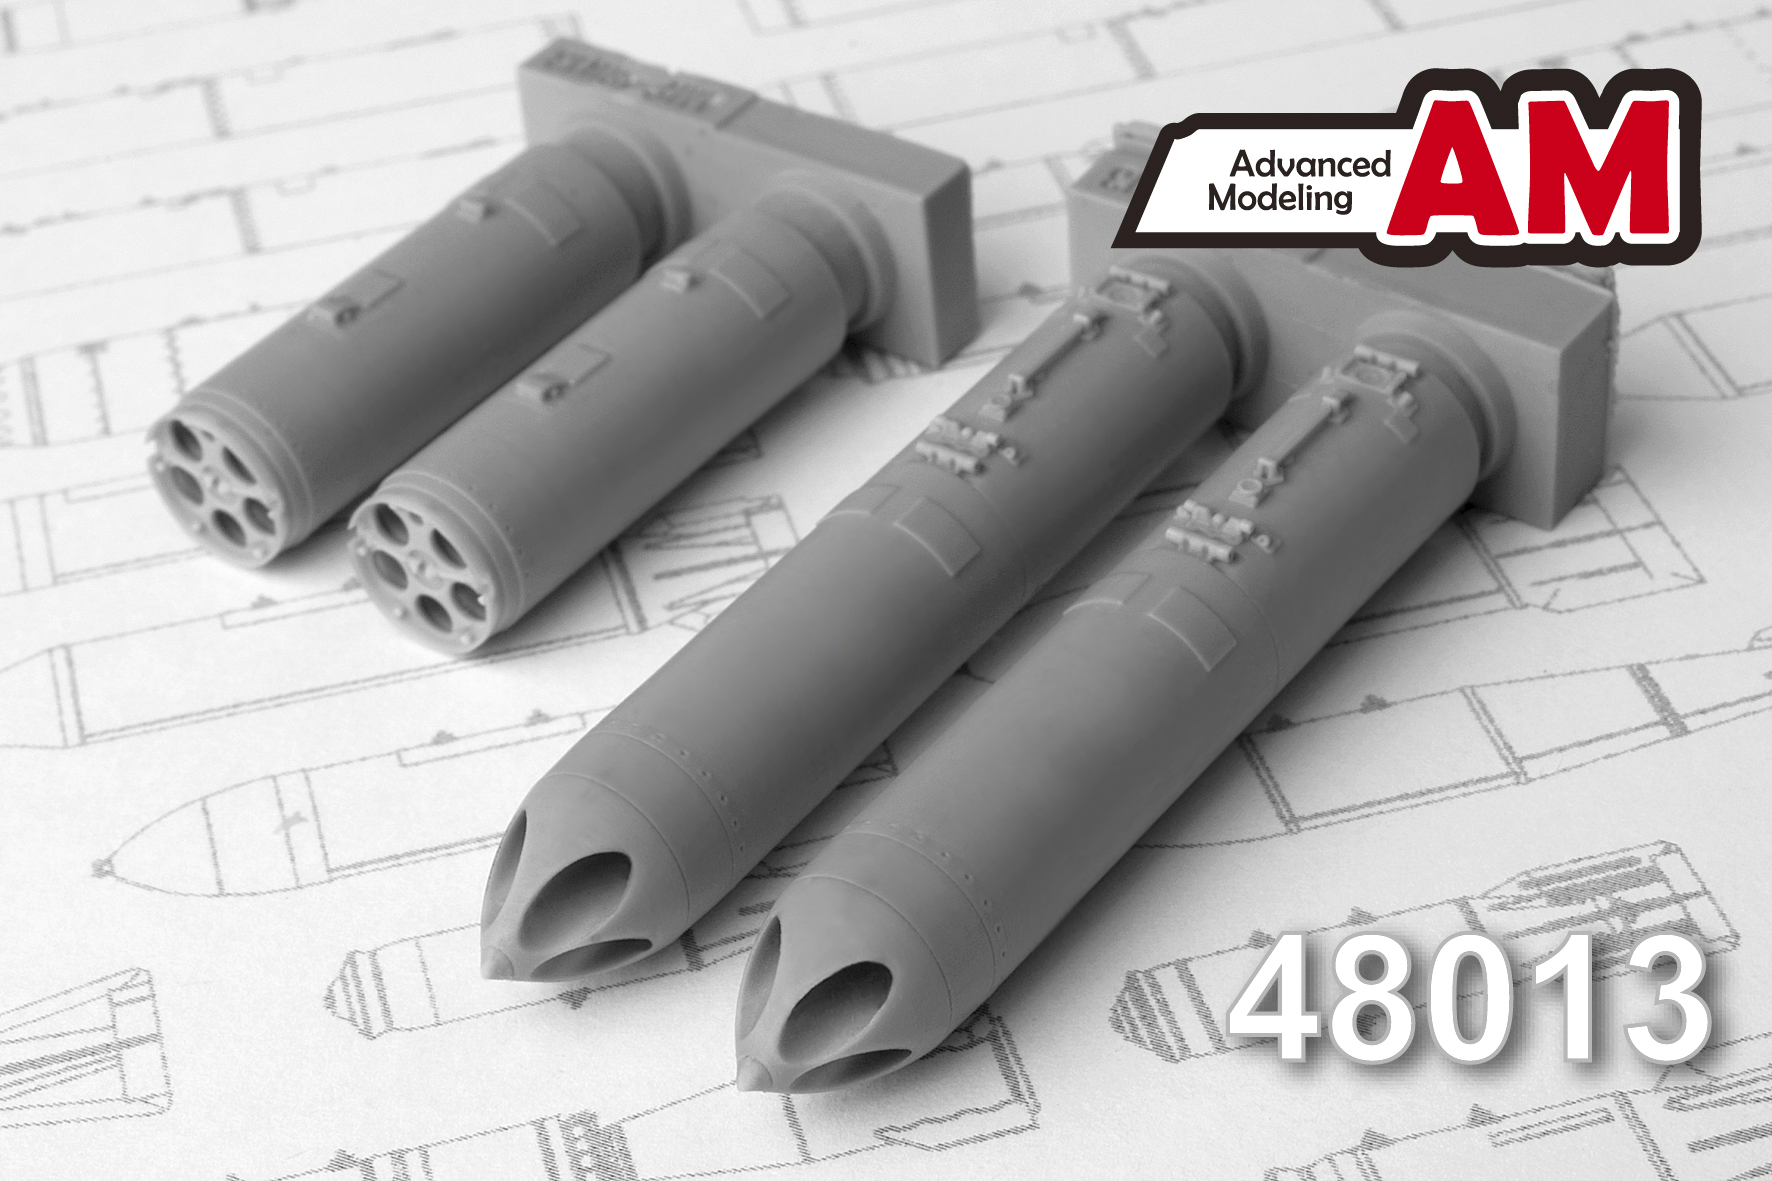 Additions (3D resin printing) 1/48 B13L Block of unguided aviation missiles (Advanced Modeling) 